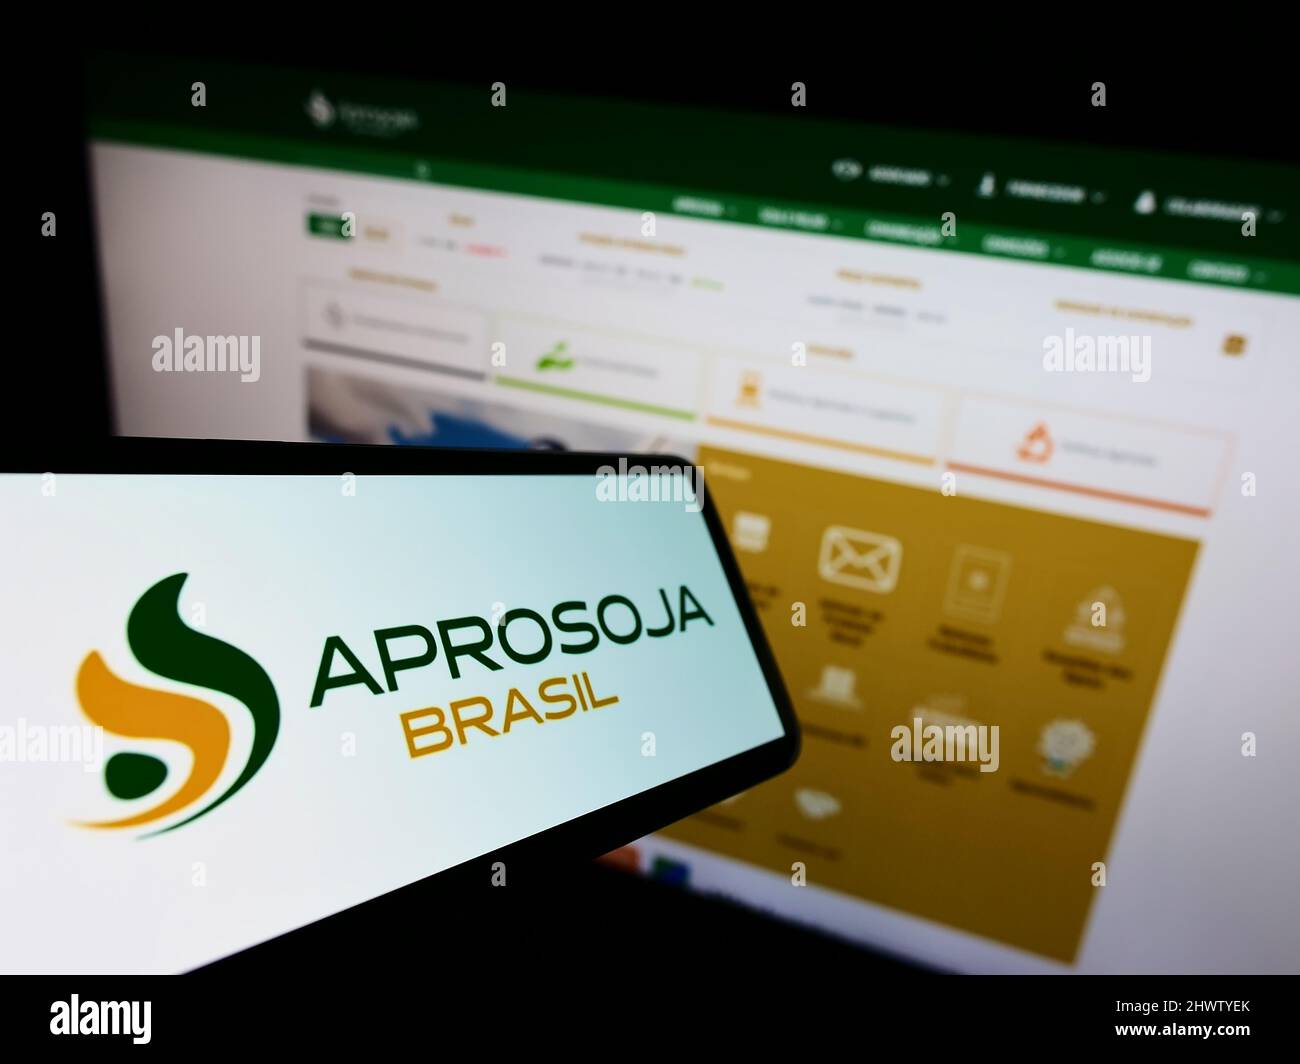 Mobile phone with logo of Brazilian agriculture company Aprosoja on screen in front of business website. Focus on center-left of phone display. Stock Photo